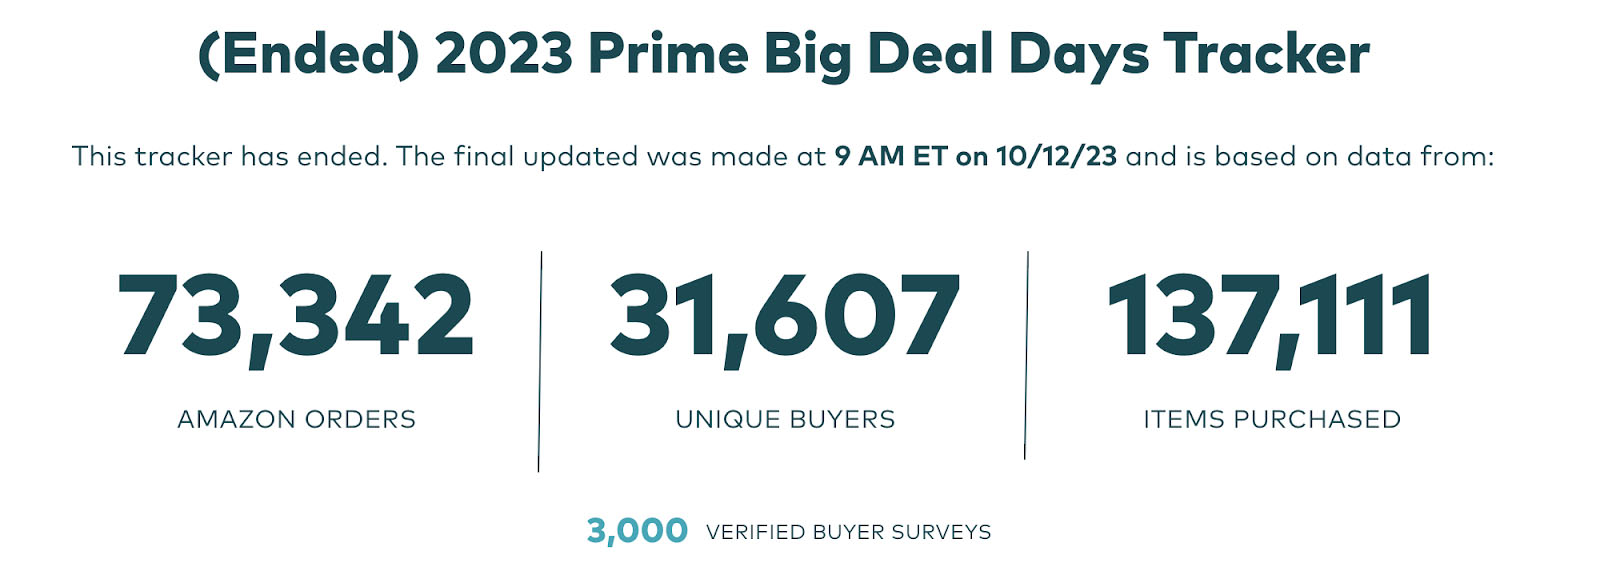 2023 Prime Big Deal Days numbers: orders, unique buyers, and items purchased.